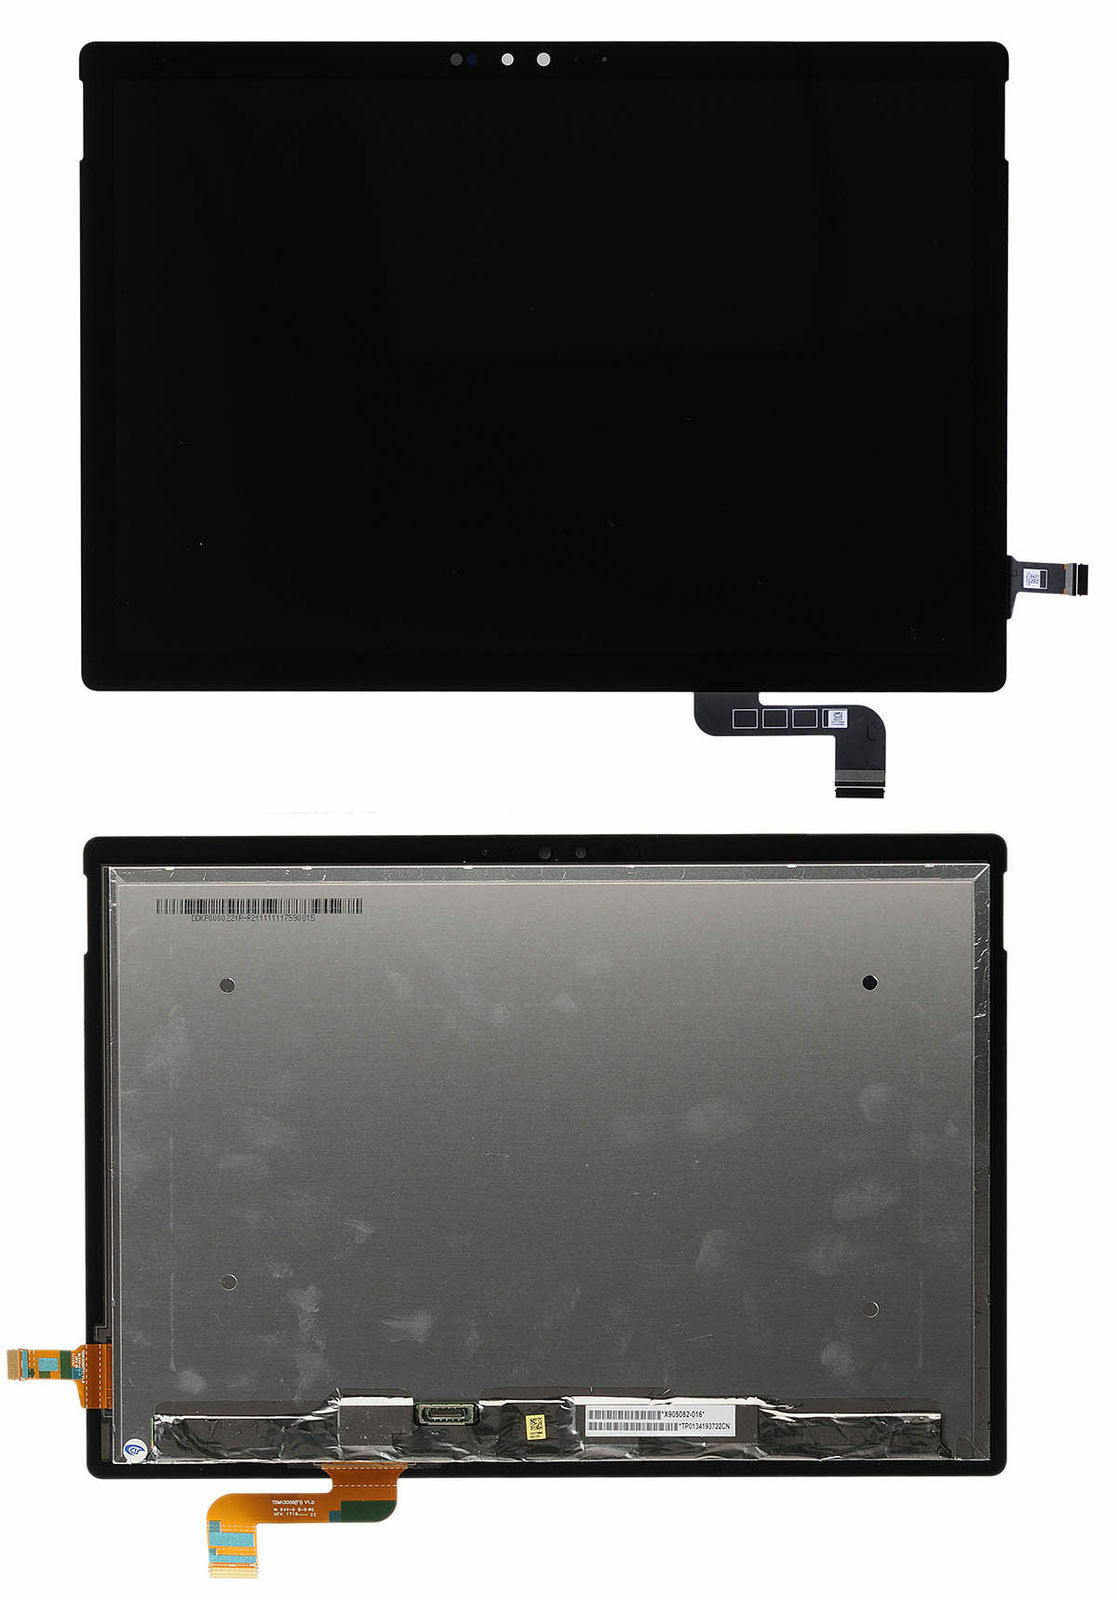 For Microsoft Surface Book 1703 1704 1705 LCD Touch Screen Digitizer Assembly - $129.00